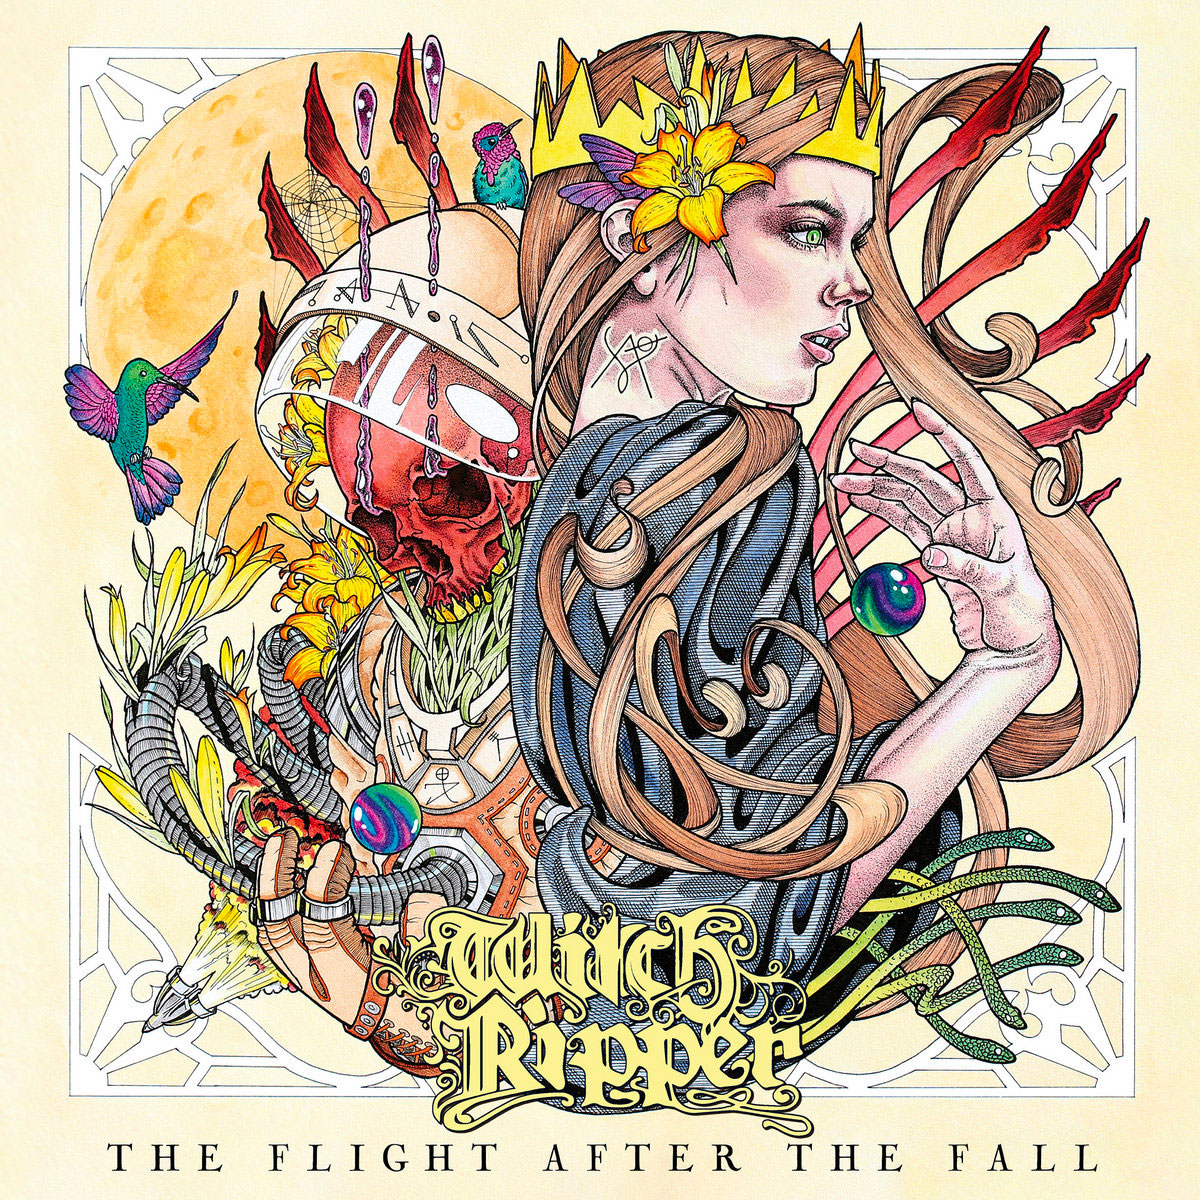 The Flight After the Fall by Witch Ripper